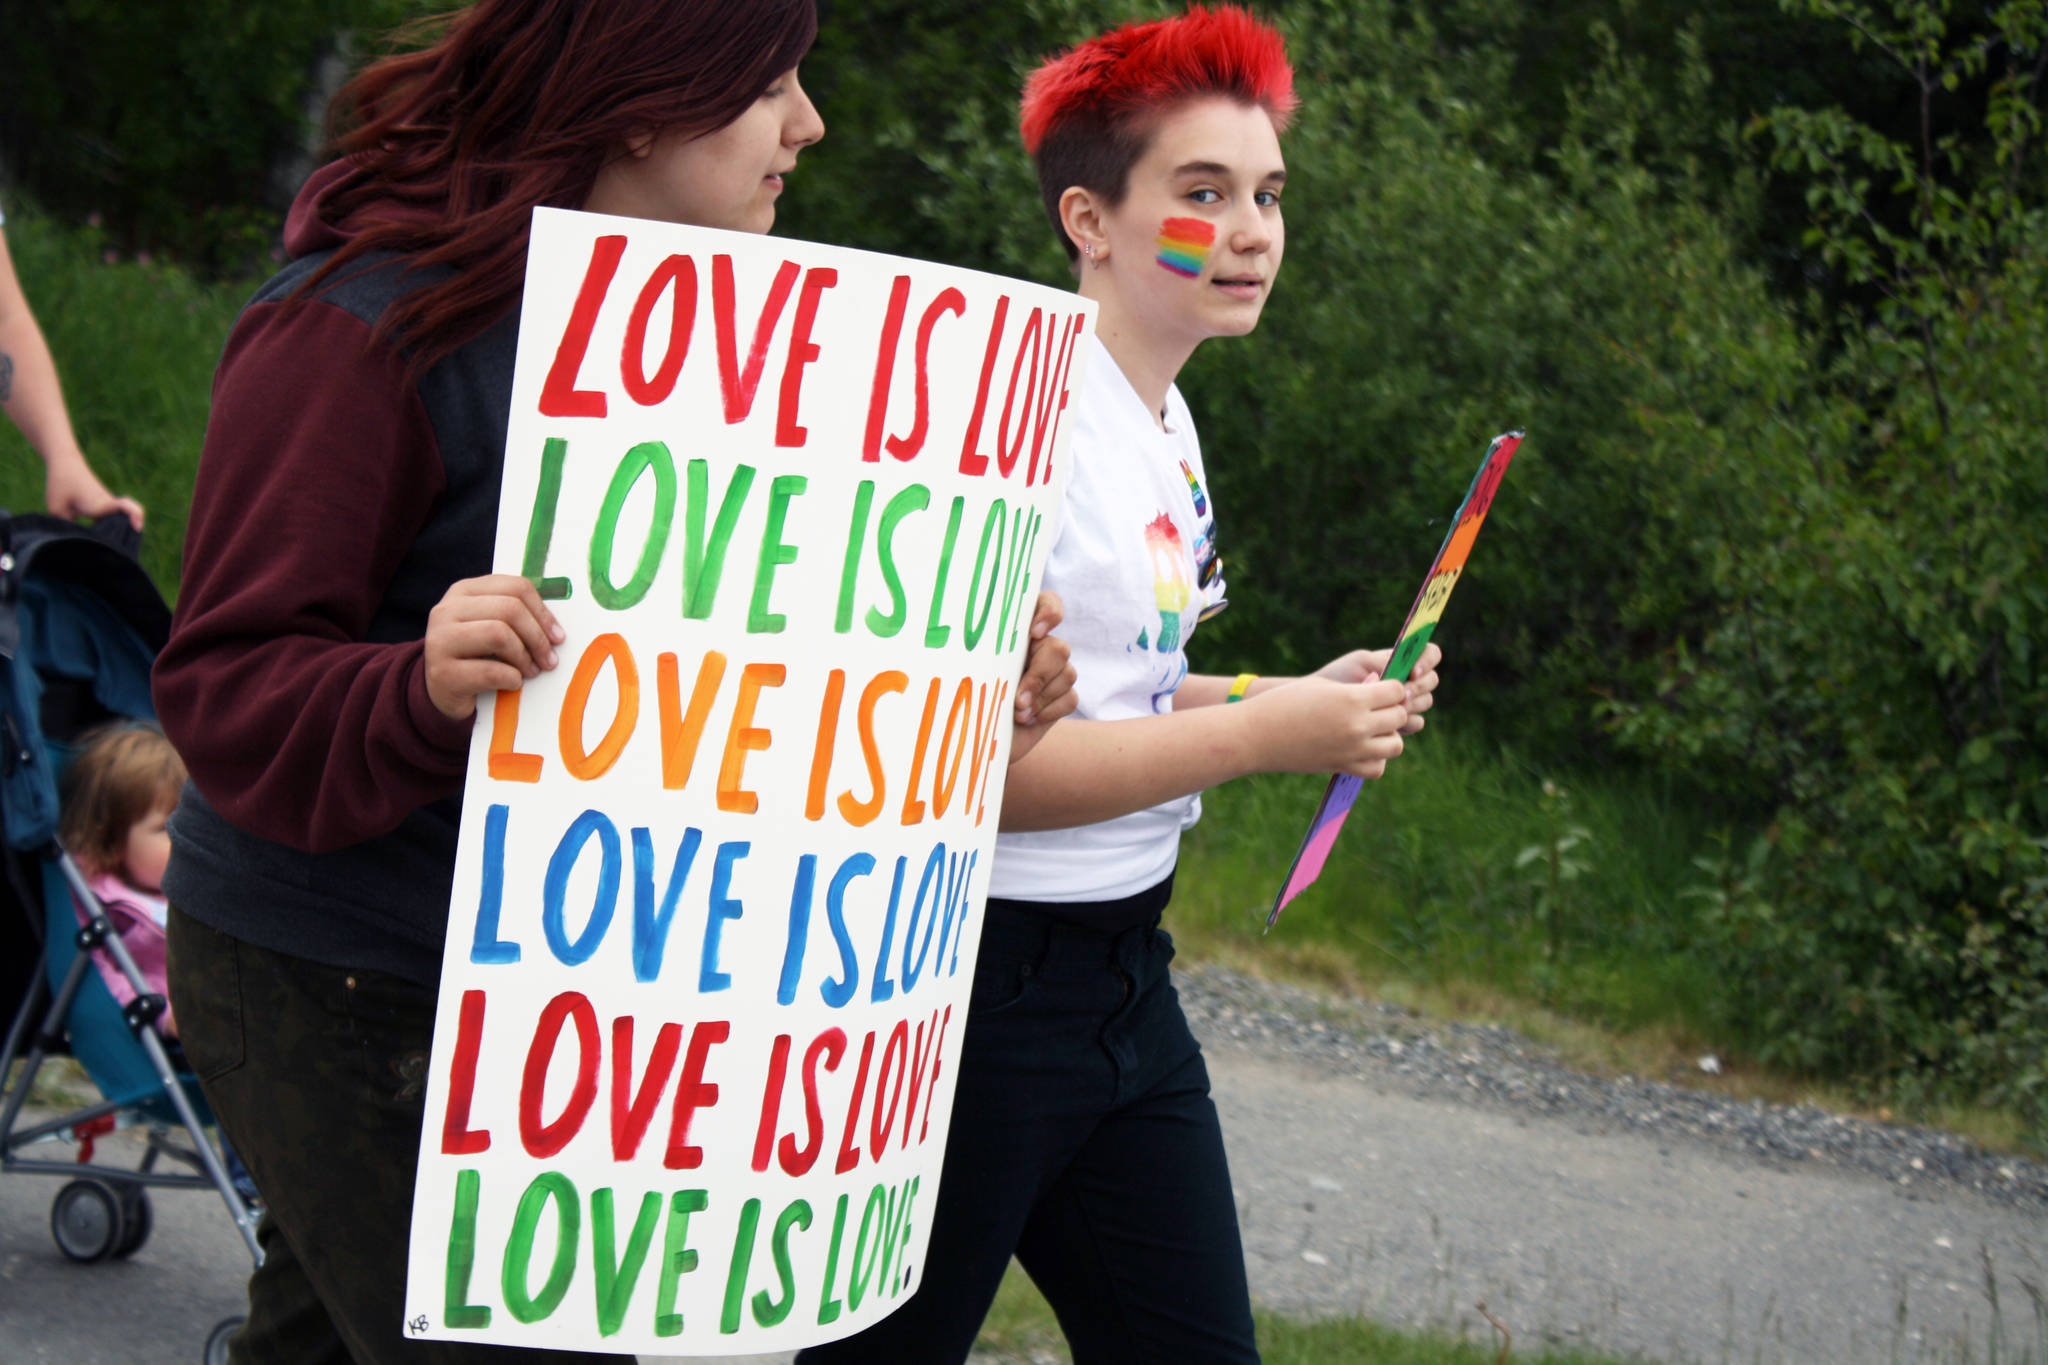 Two marchers celebrate LGBTQ Pride during the Two Spirit march from the Soldotna Sports Complex to Soldotna Creek Park. About 60 people turned out to take part in the march, which was part of wordwide celebrations commemorating the beginning of the LGBTQ civil rights movement. (Photo by Erin Thompson/Peninsula Clarion)